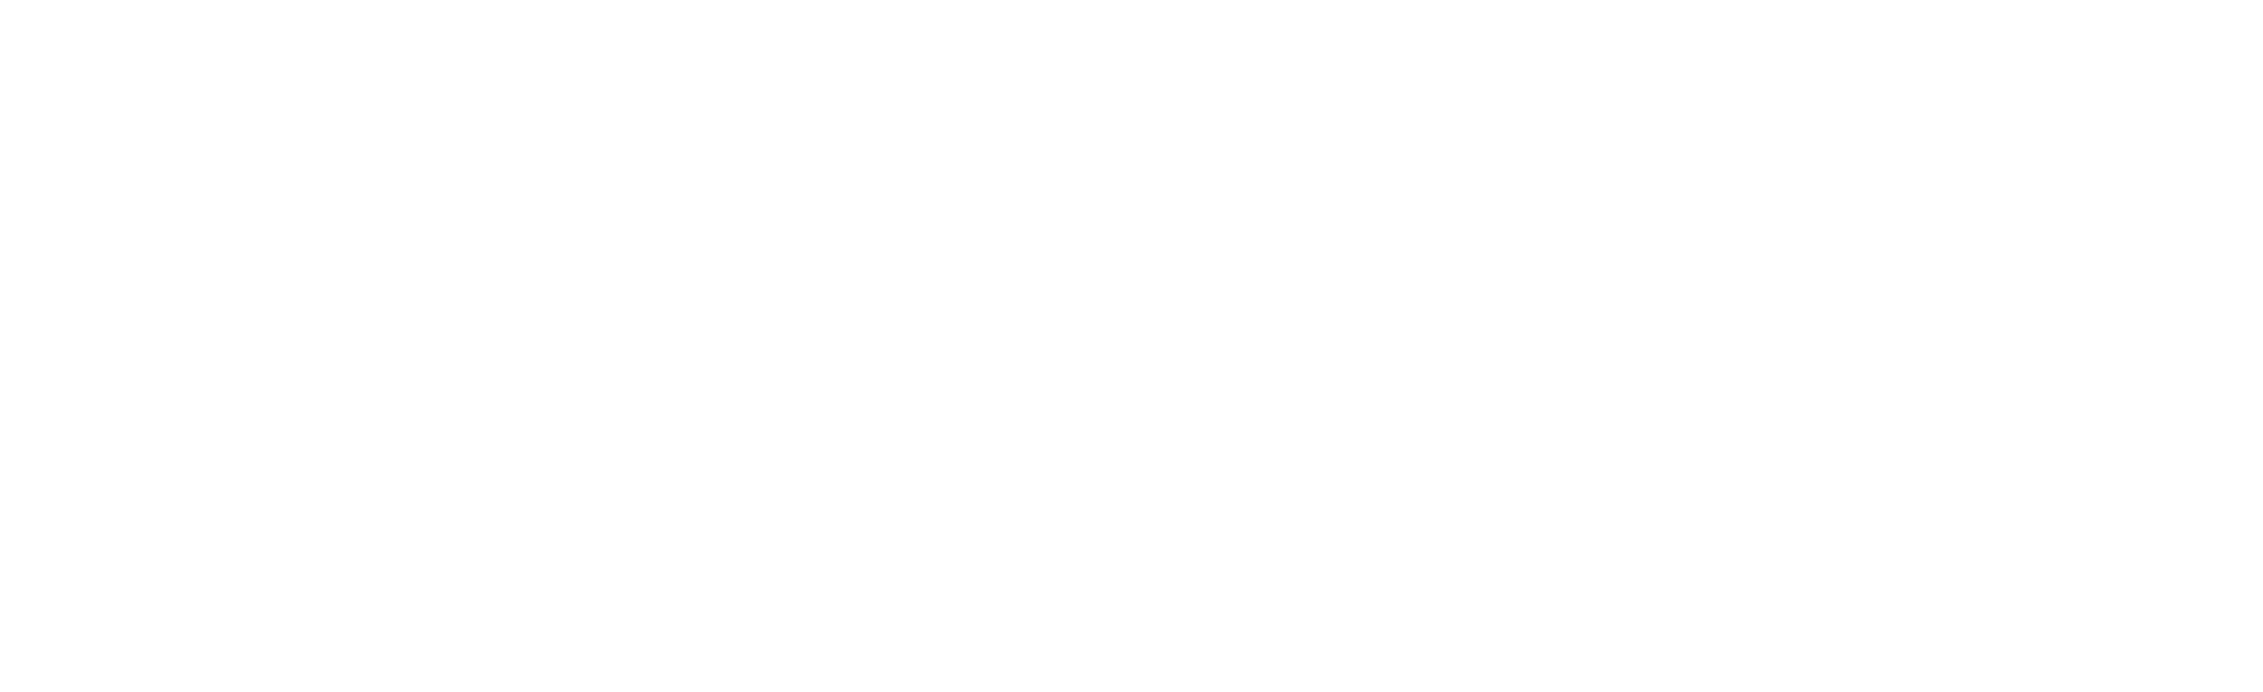 Professional Structural Engineer Logo - Meier Architecture | Engineering